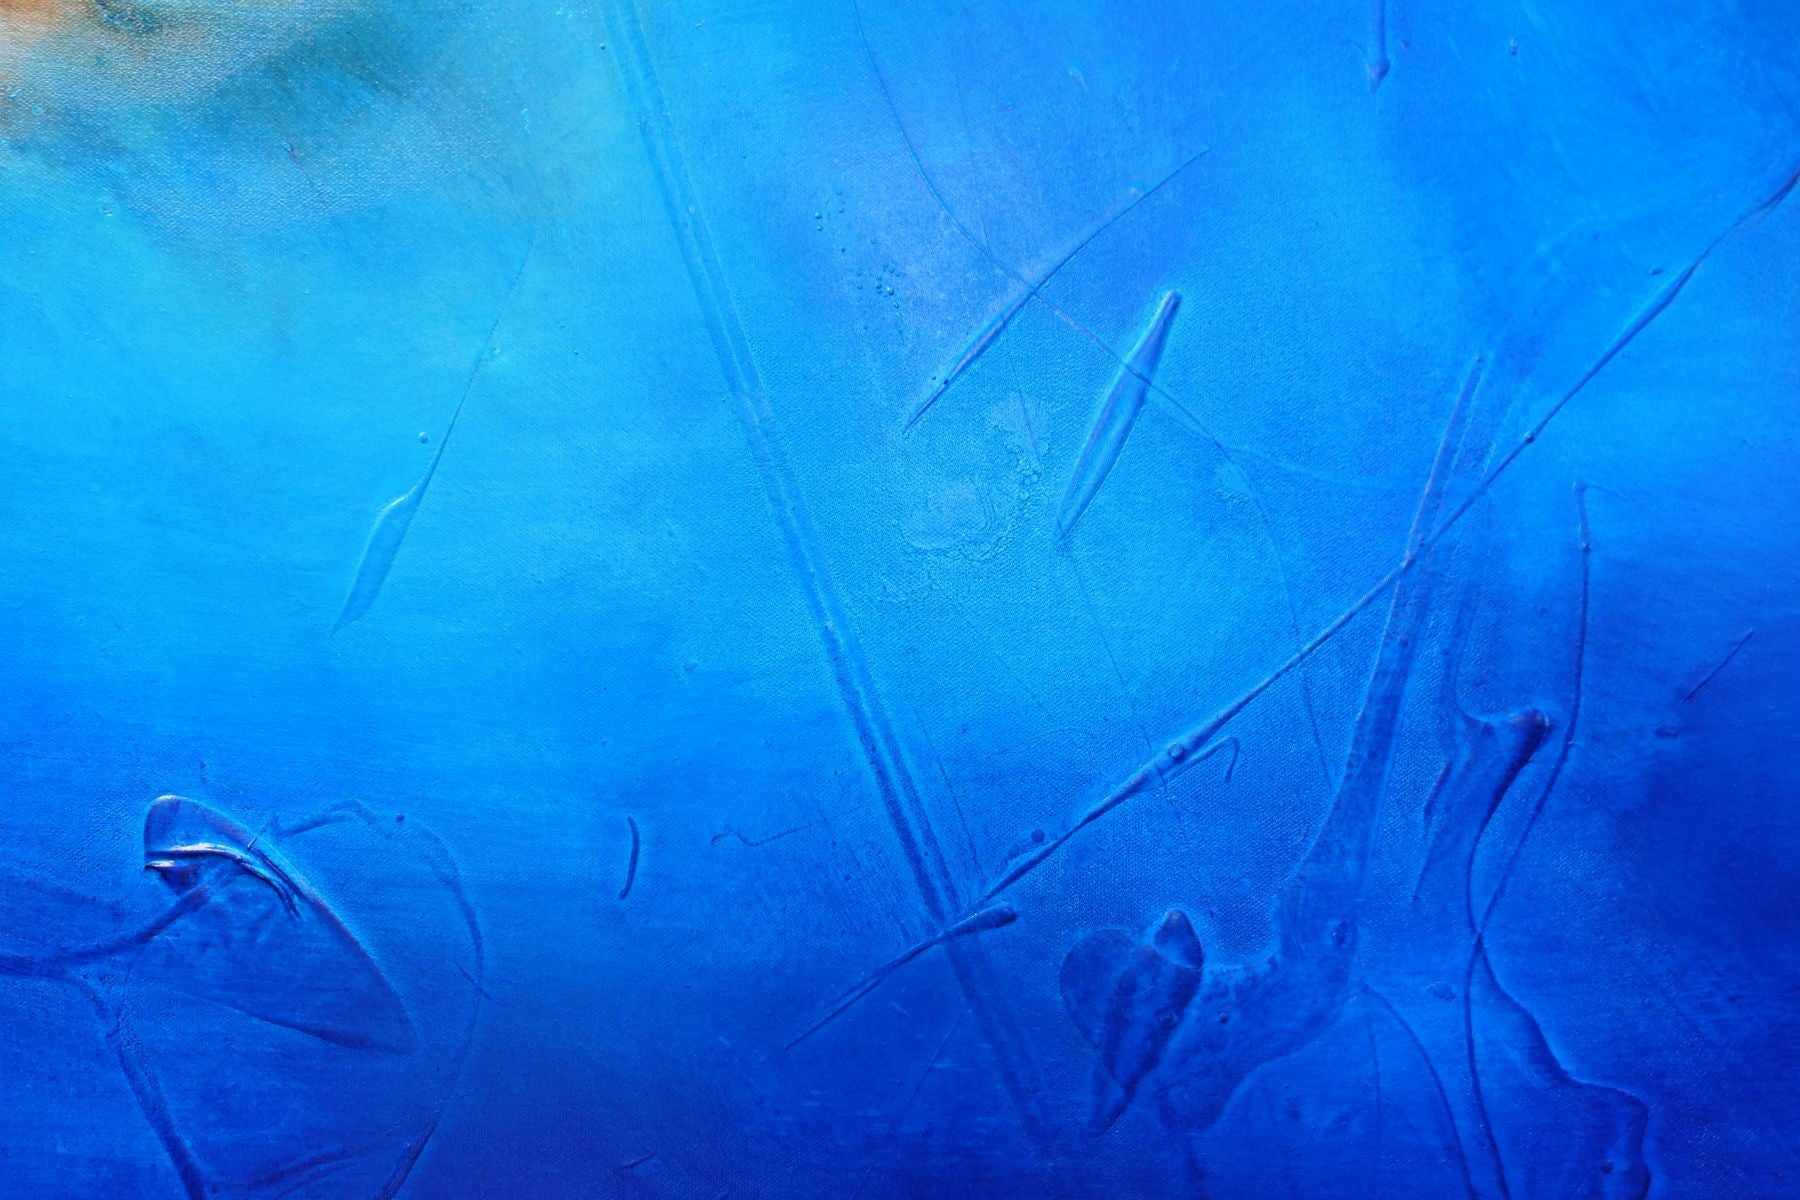 Arid Coast 150cm x 150cm Blue Oxide Textured Abstract Painting (SOLD)